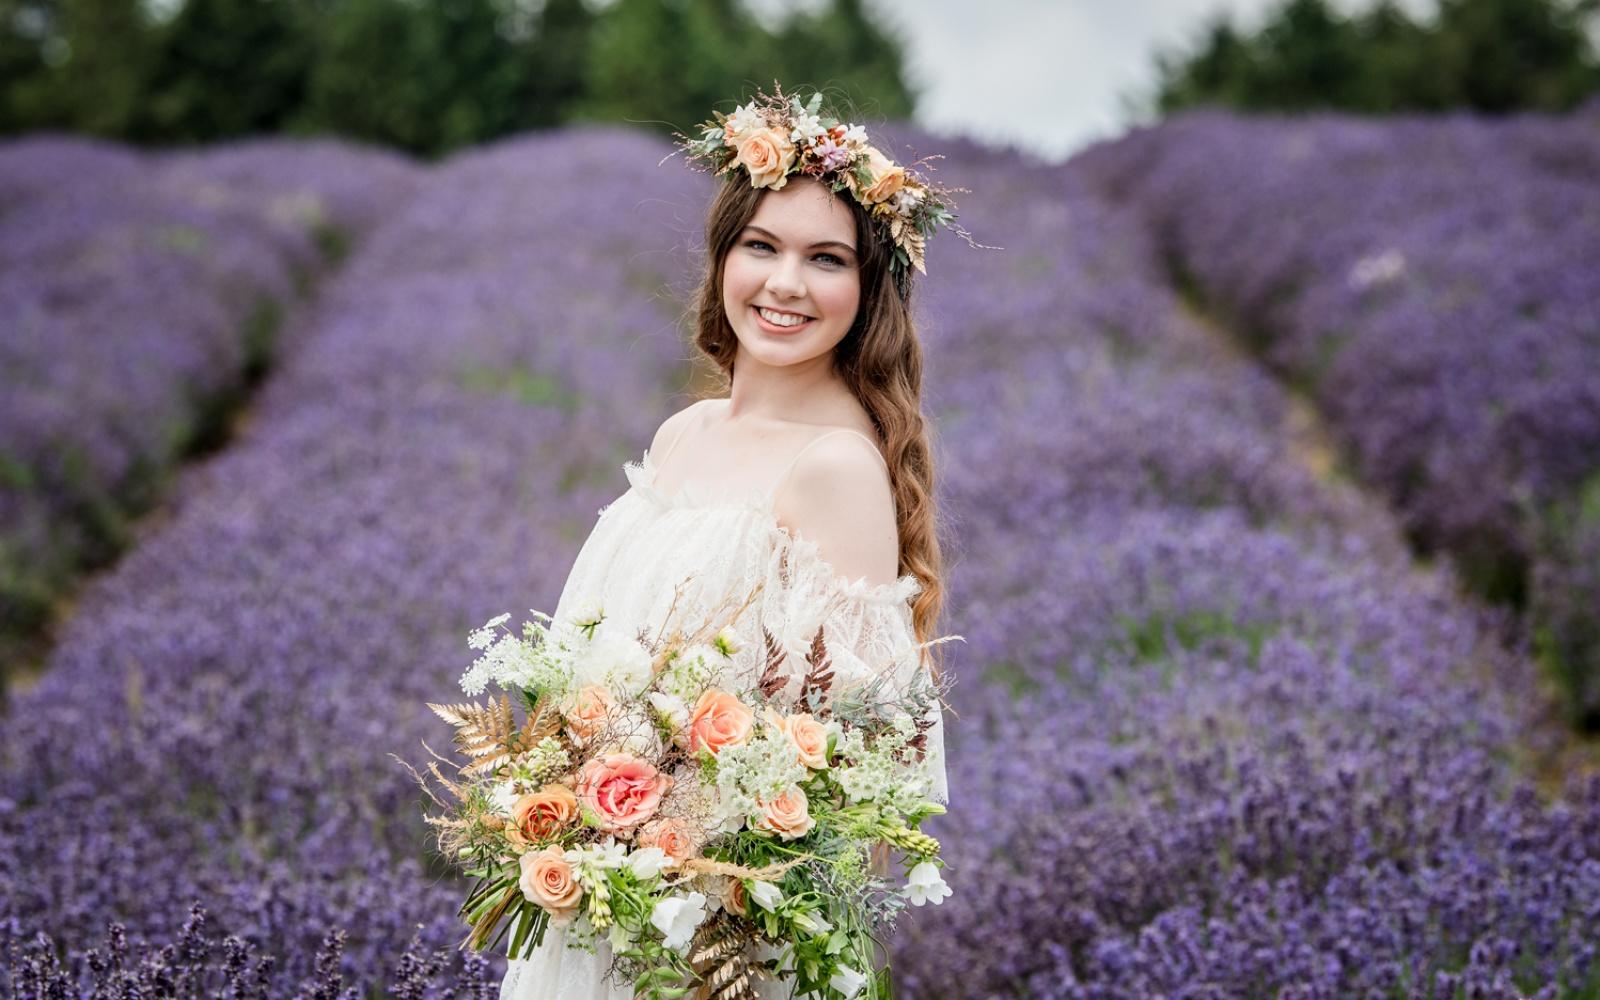 Styled Shoot ideas inspiration Capture Every Moment Make Up by Carissa Wendy House Flowers Willoughby Wolf lavender fields Snowshill floral crown david austen roses peach